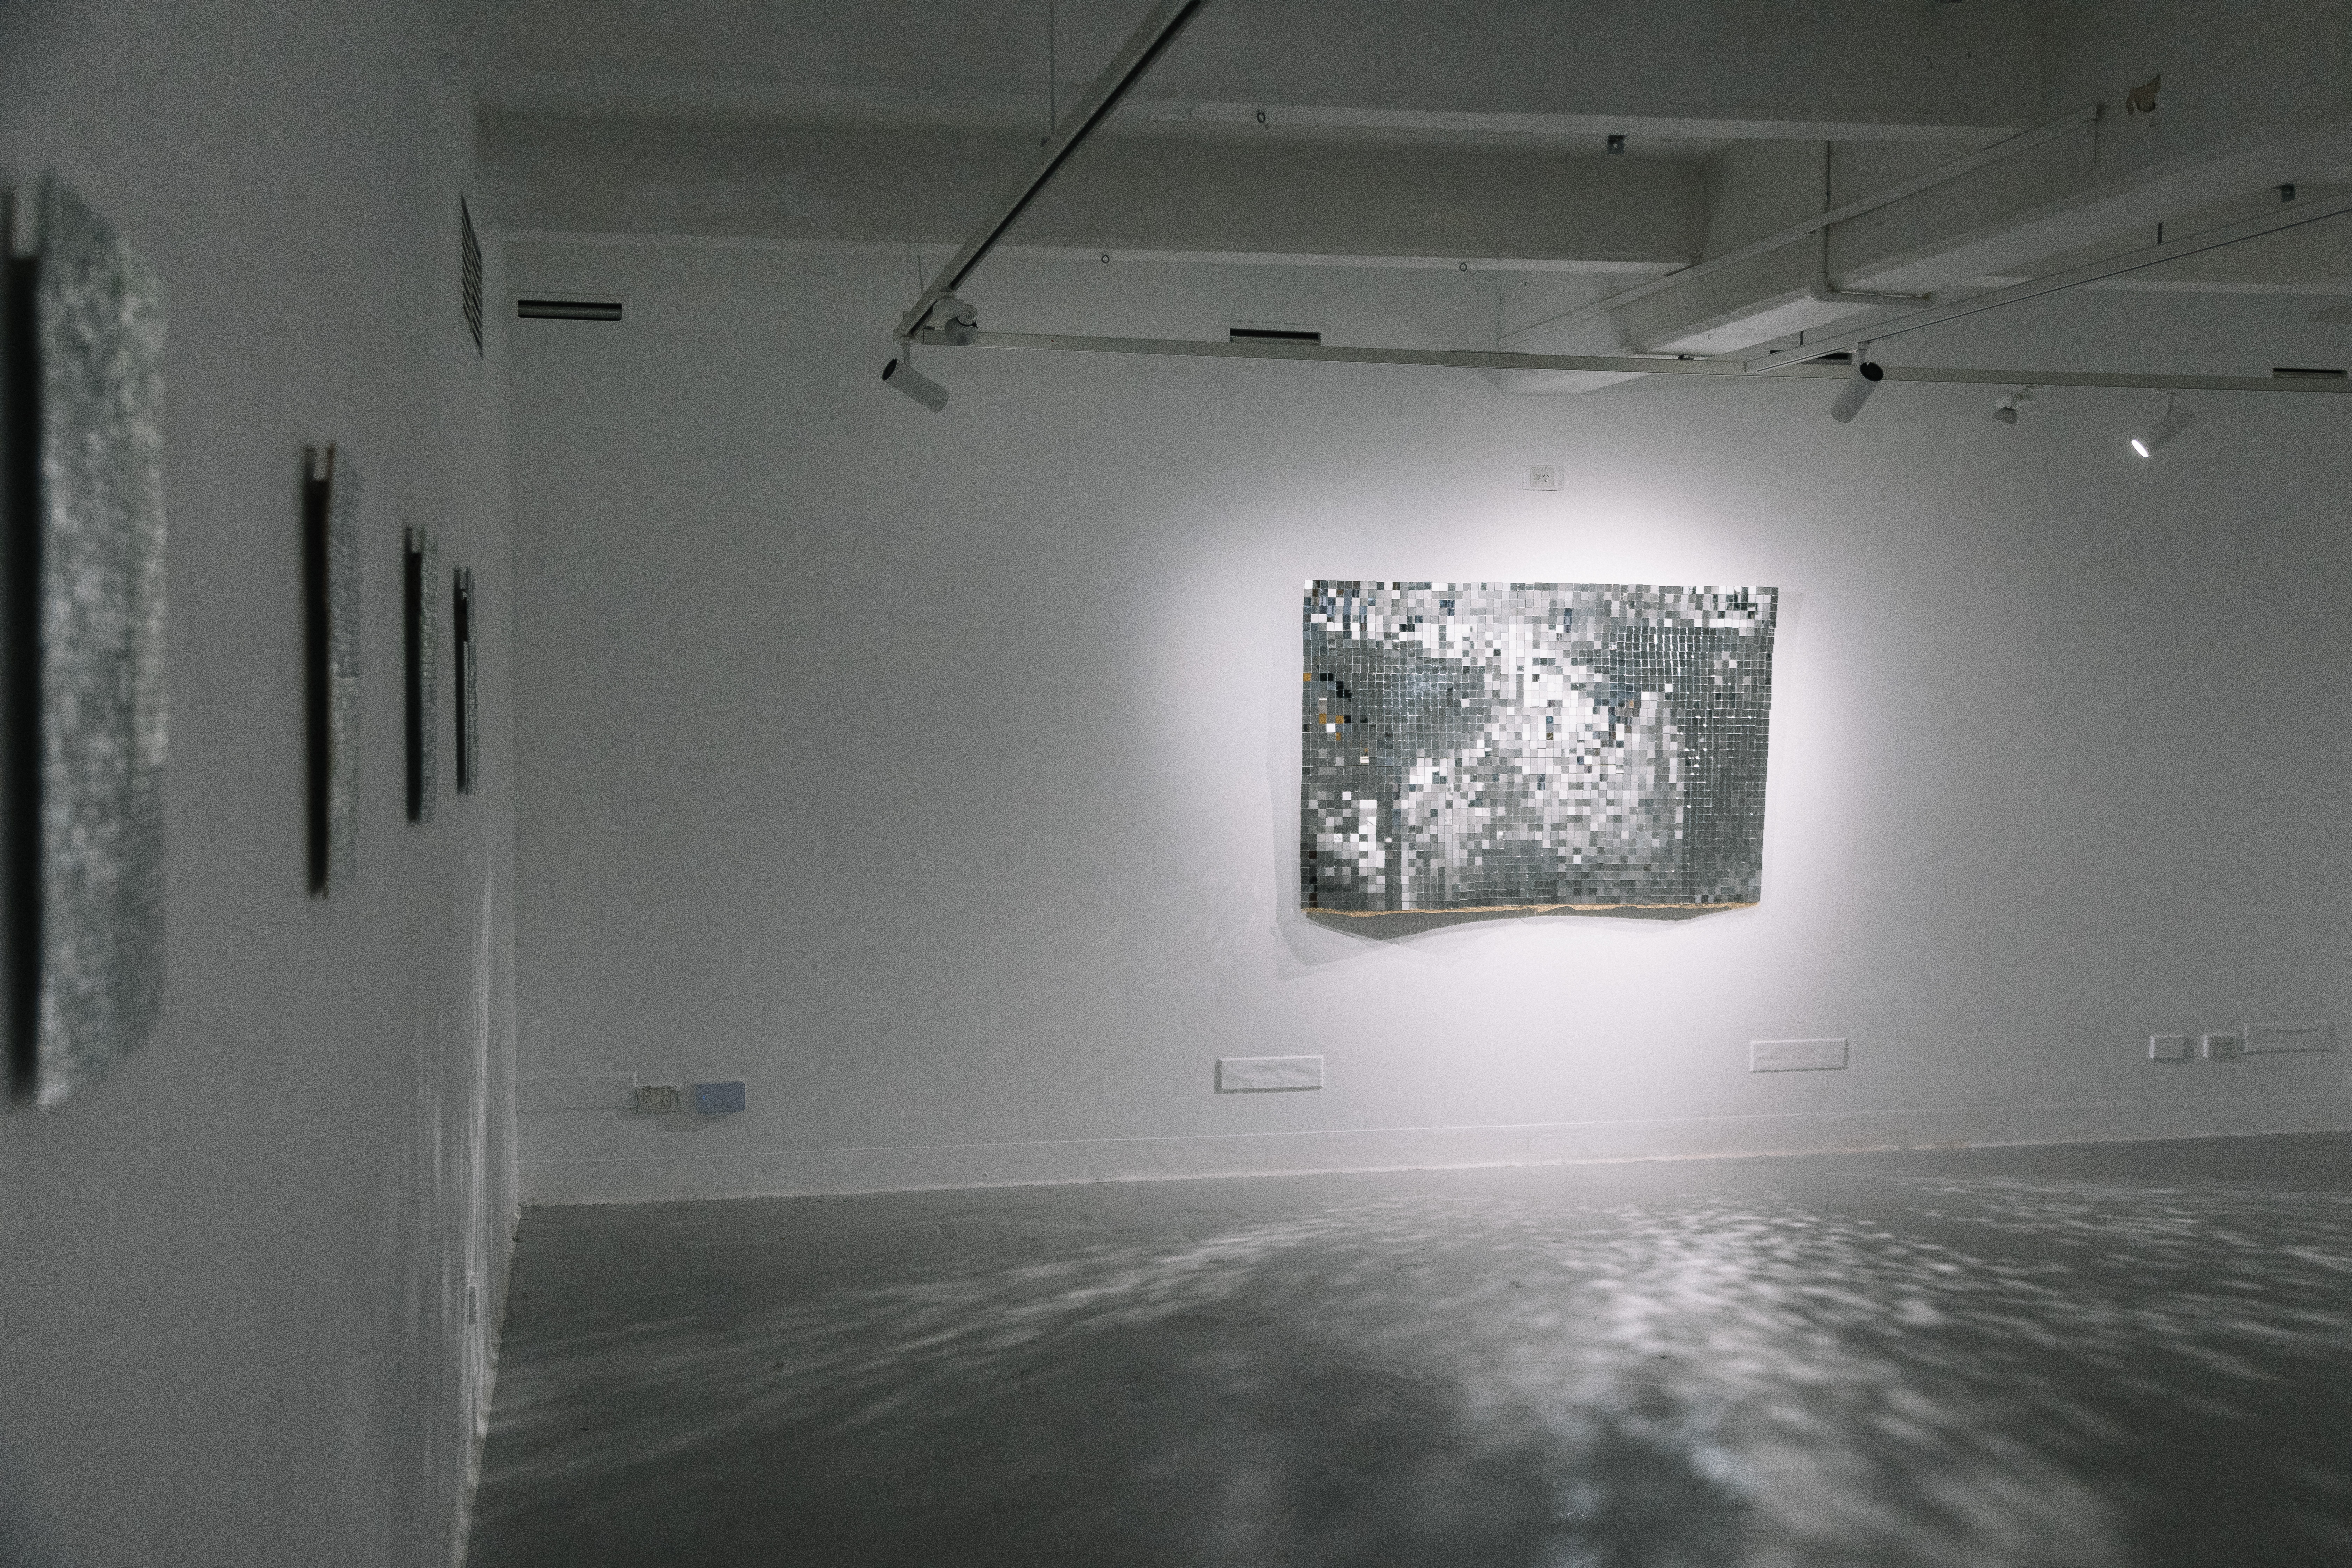 A detailed photograph of mirrored artworks installed on a wall